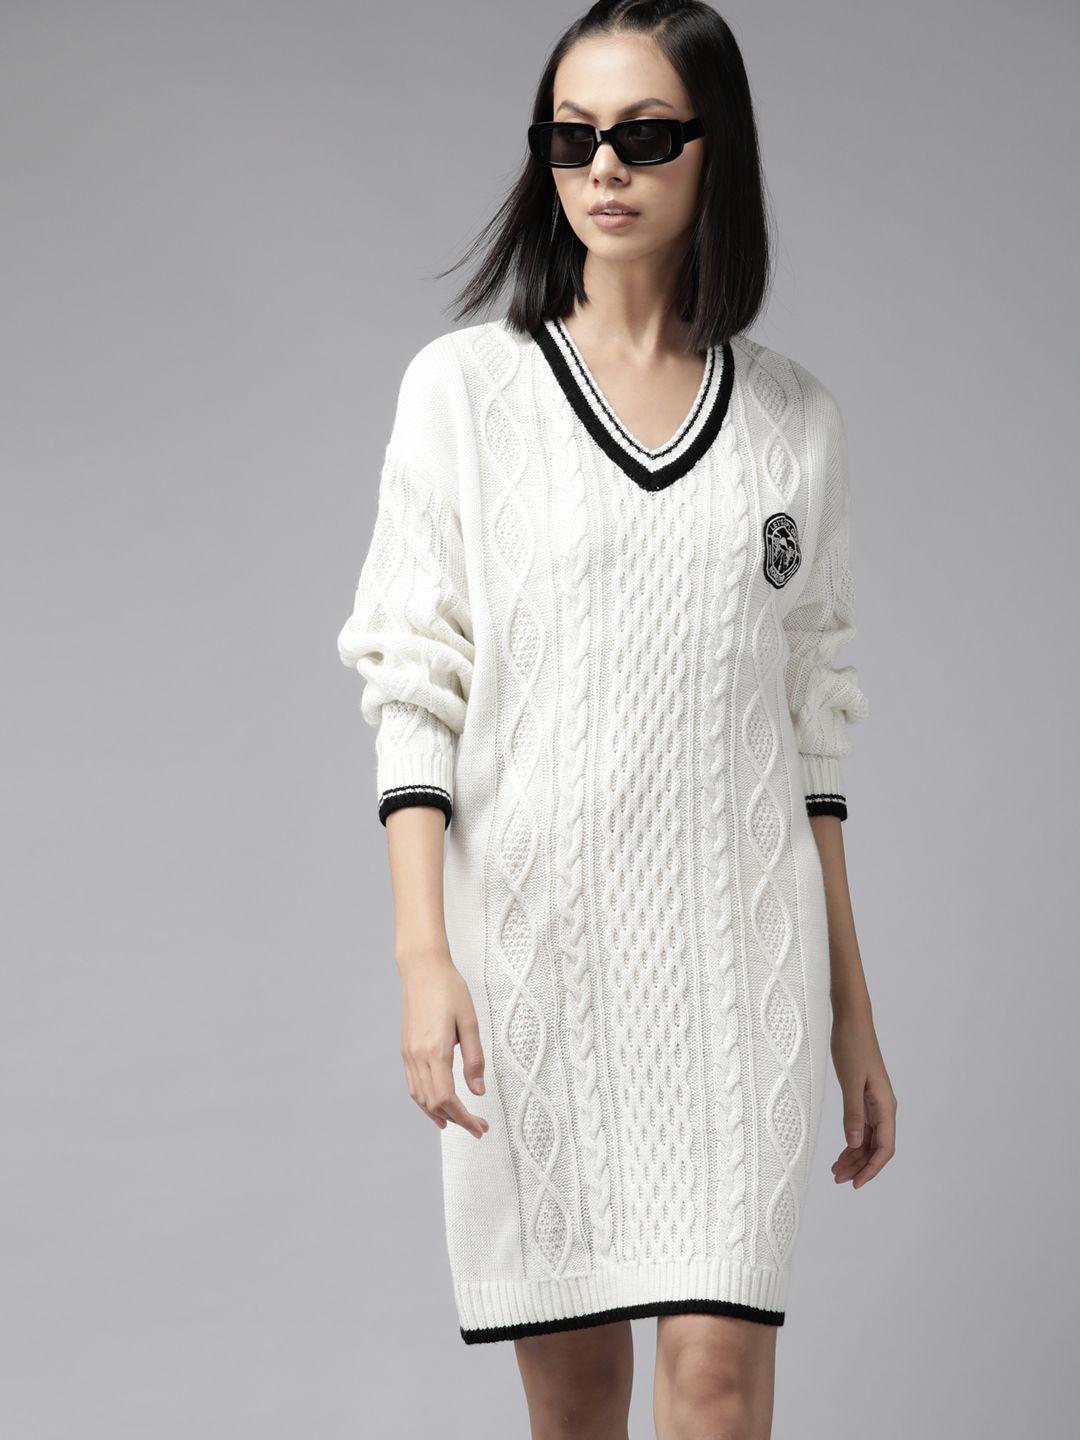 the roadster lifestyle co. women white acrylic cable knit sweater dress